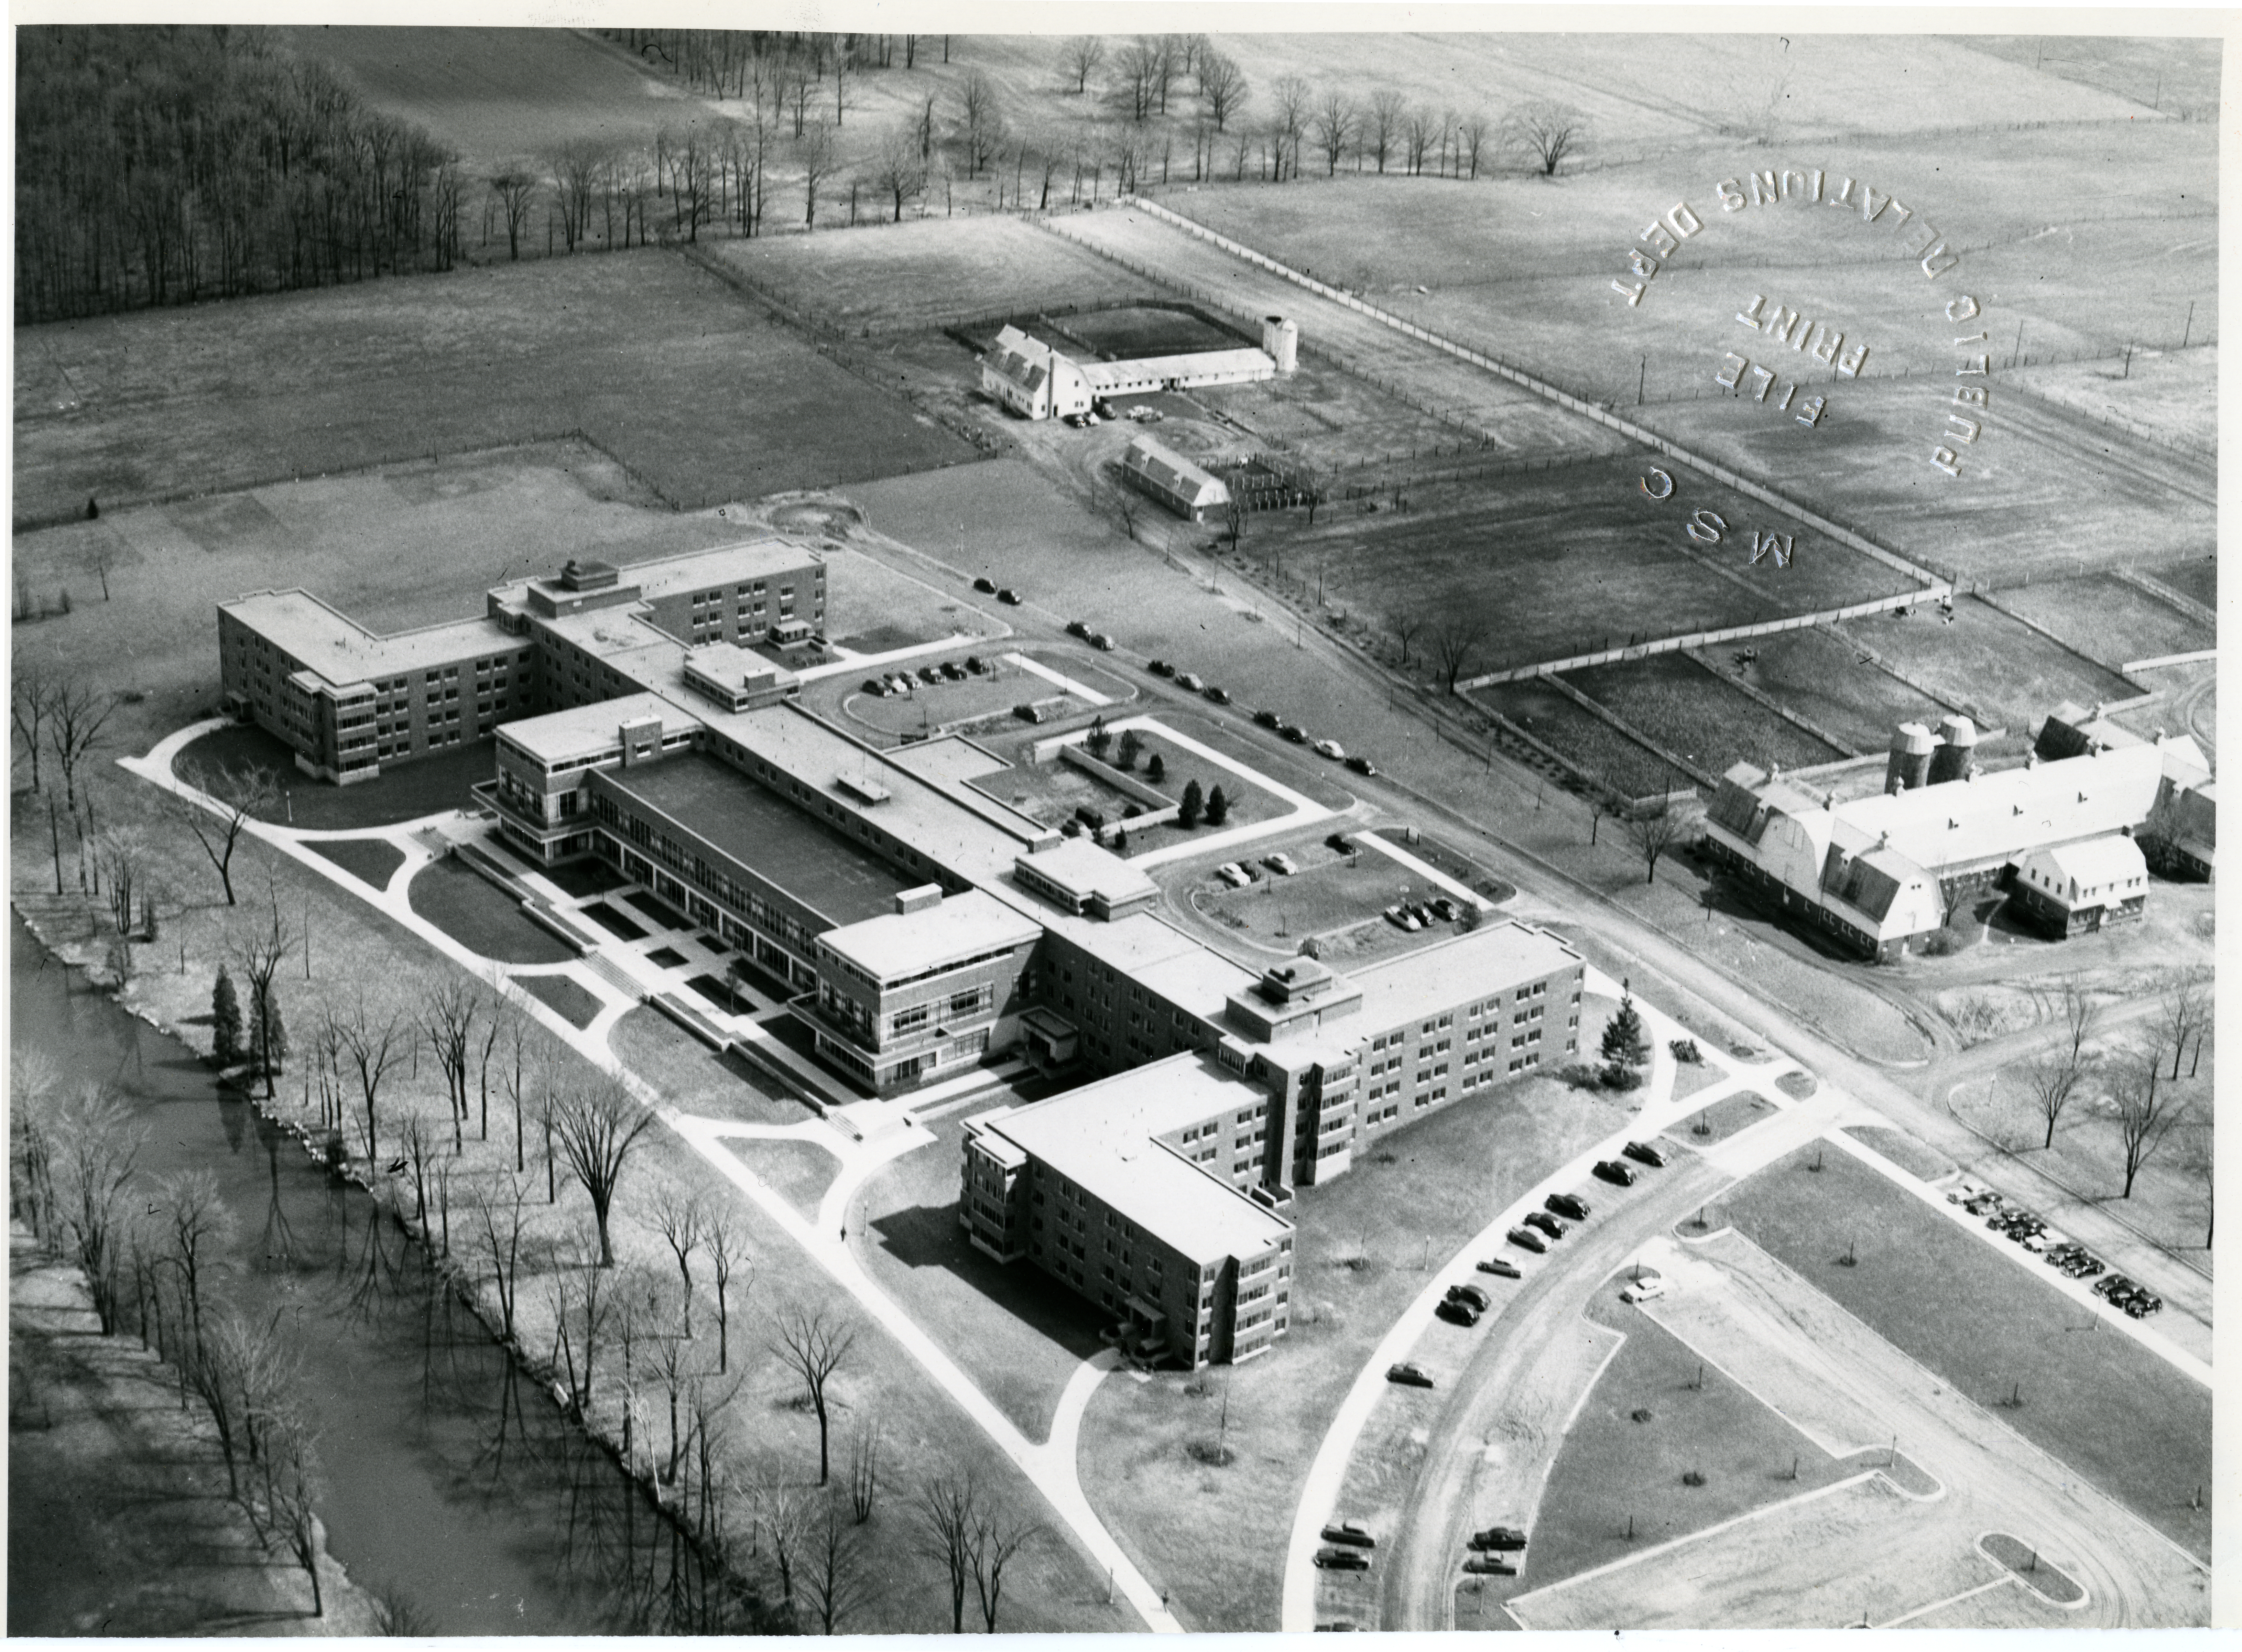 Shaw Hall Aerial View, 1950